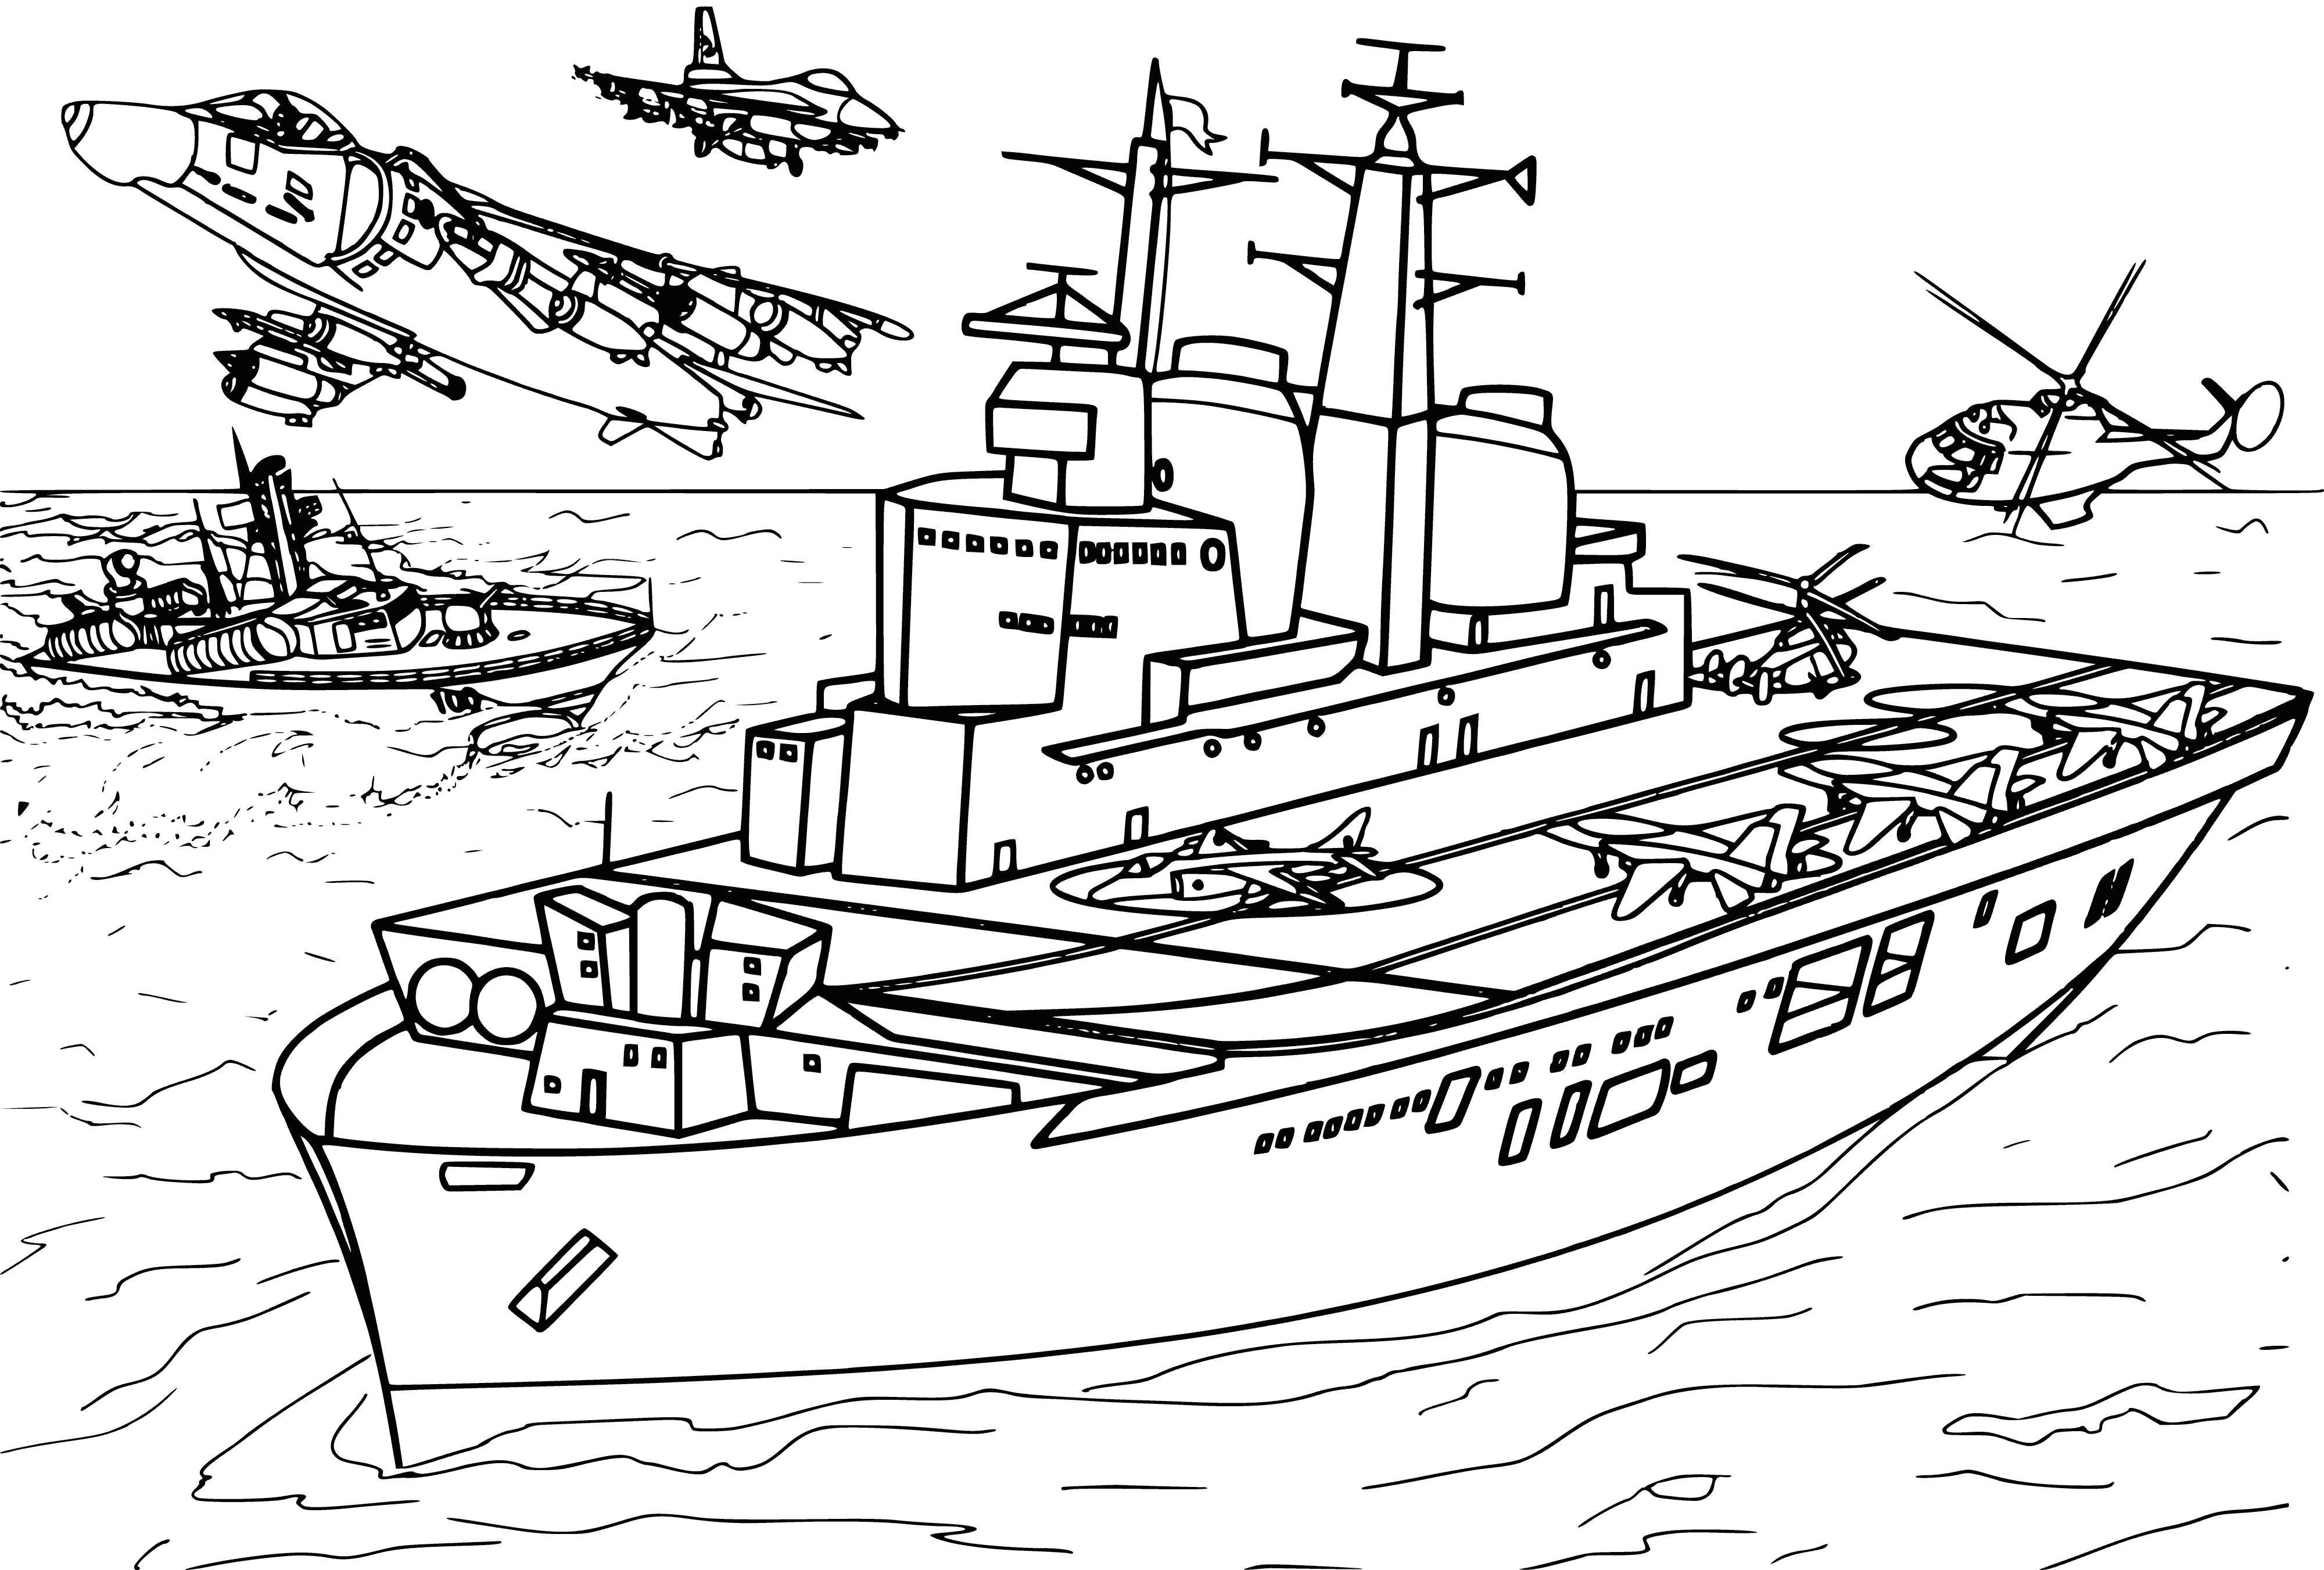 coloring page: Coloring page of British aircraft carrier "Invincible": decks, antennas, communications, large guns. Small boats surround the ship.